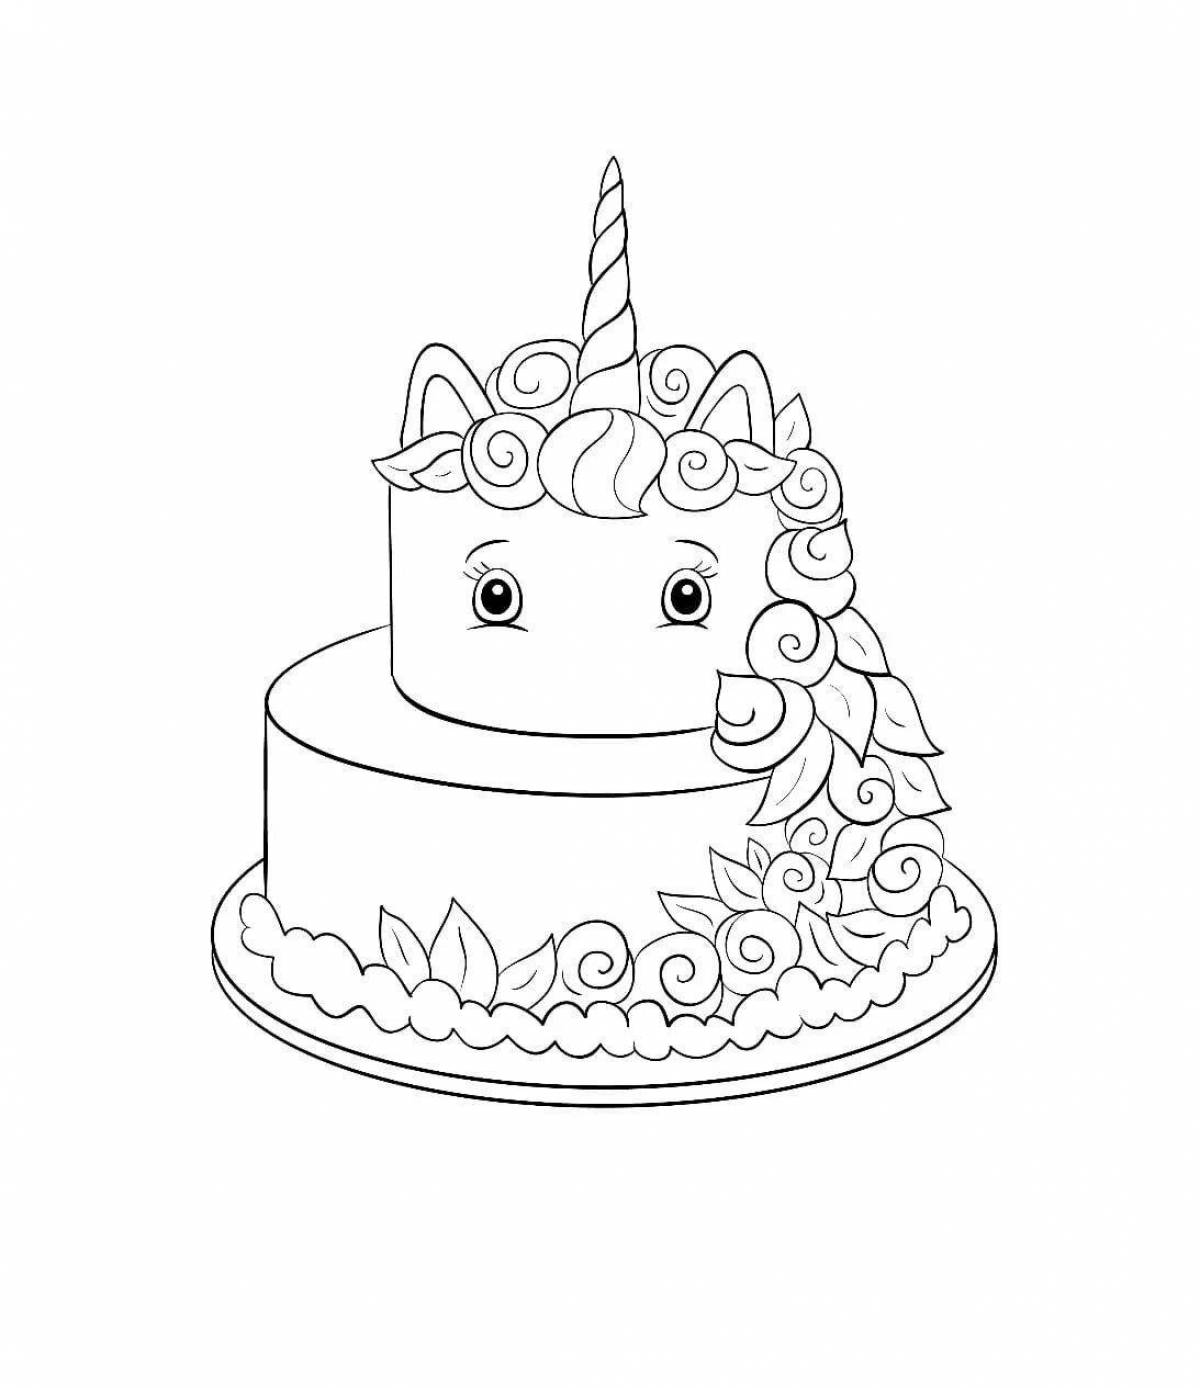 Bright cake coloring page